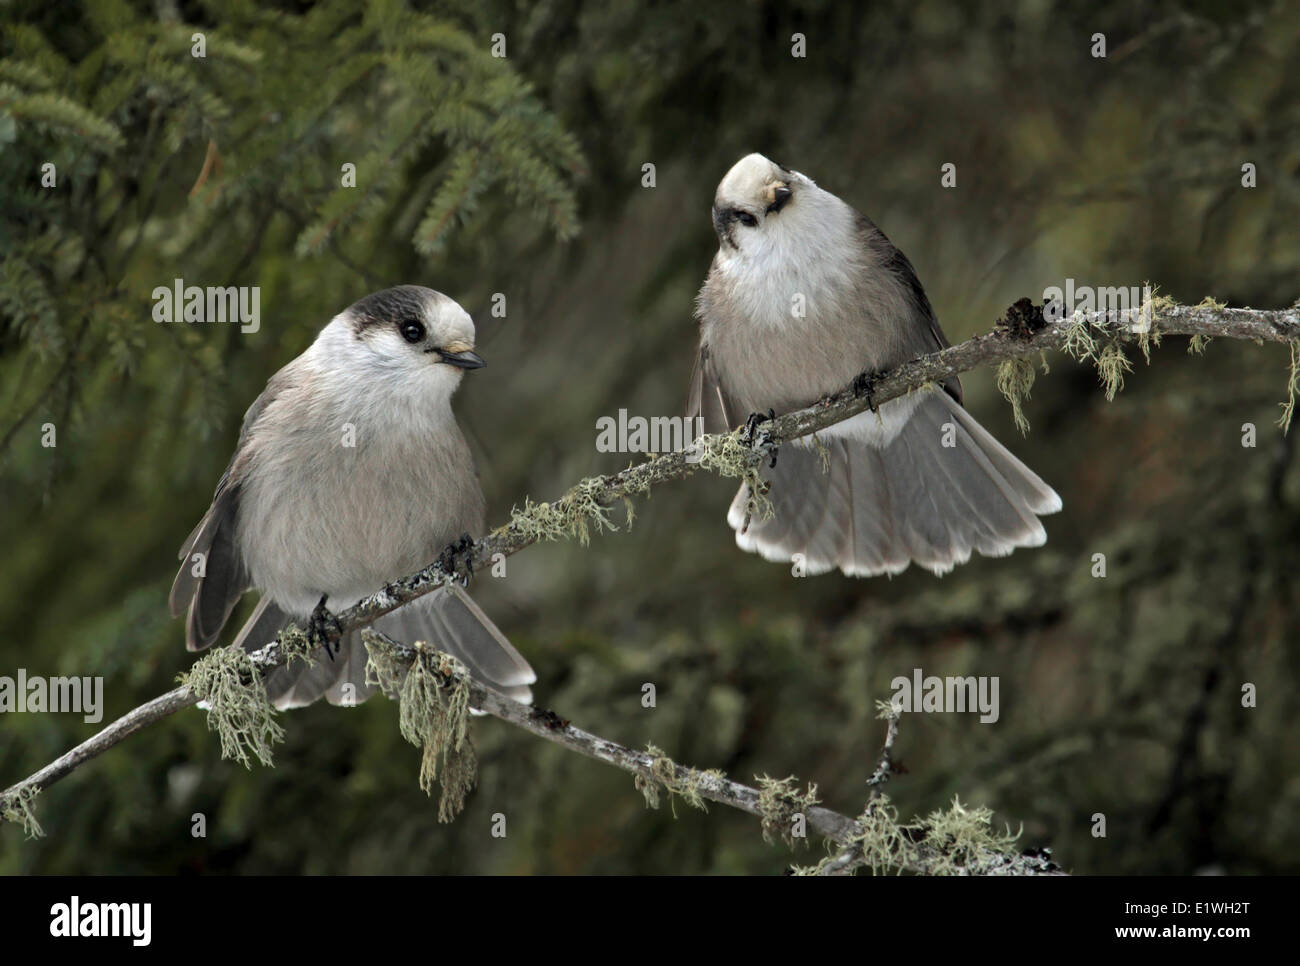 Two Gray Jays, Perisoreus canadensis, perched on a spruce tree at Candle Lake, Saskatchewan, Canada Stock Photo